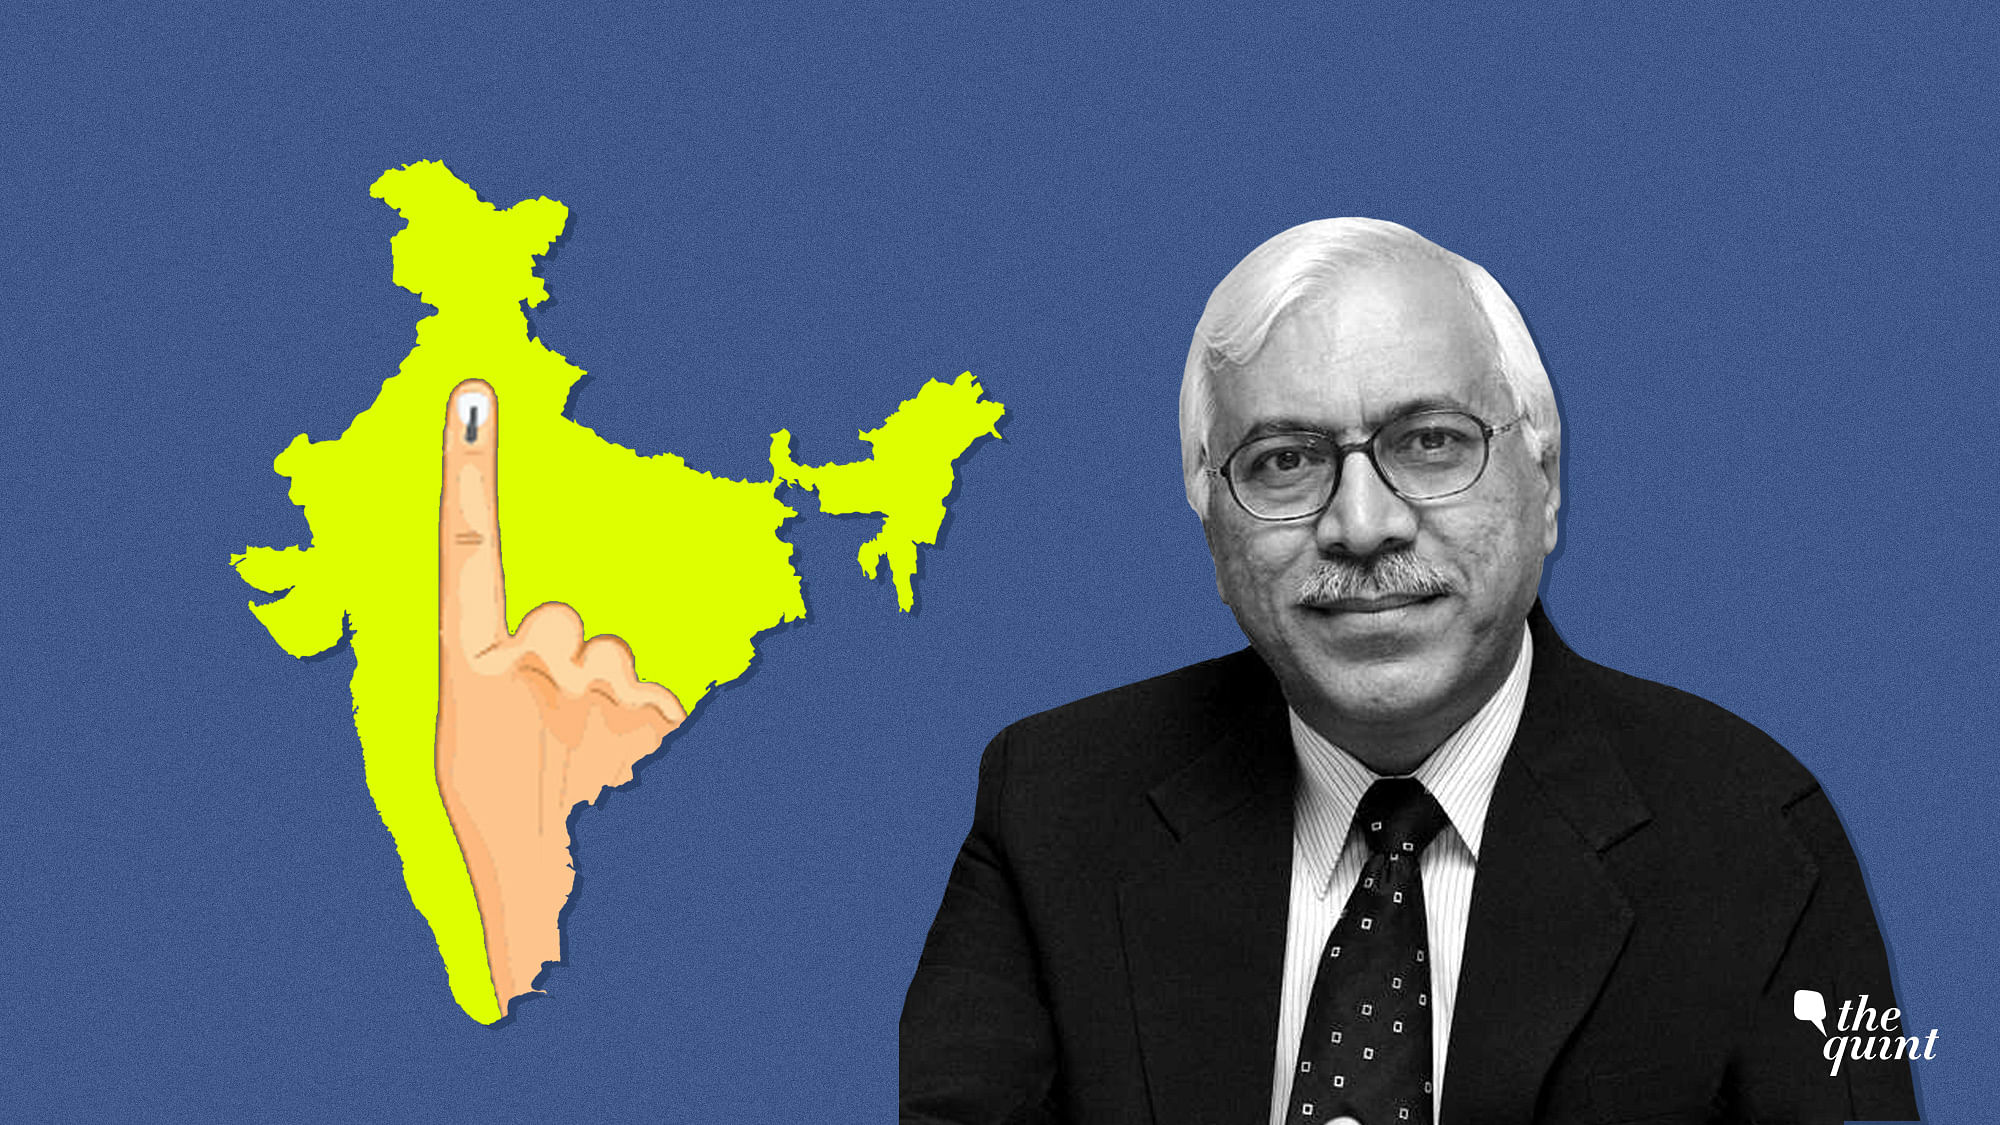 Image of SY Quraishi, former election commissioner of India, used for representation.